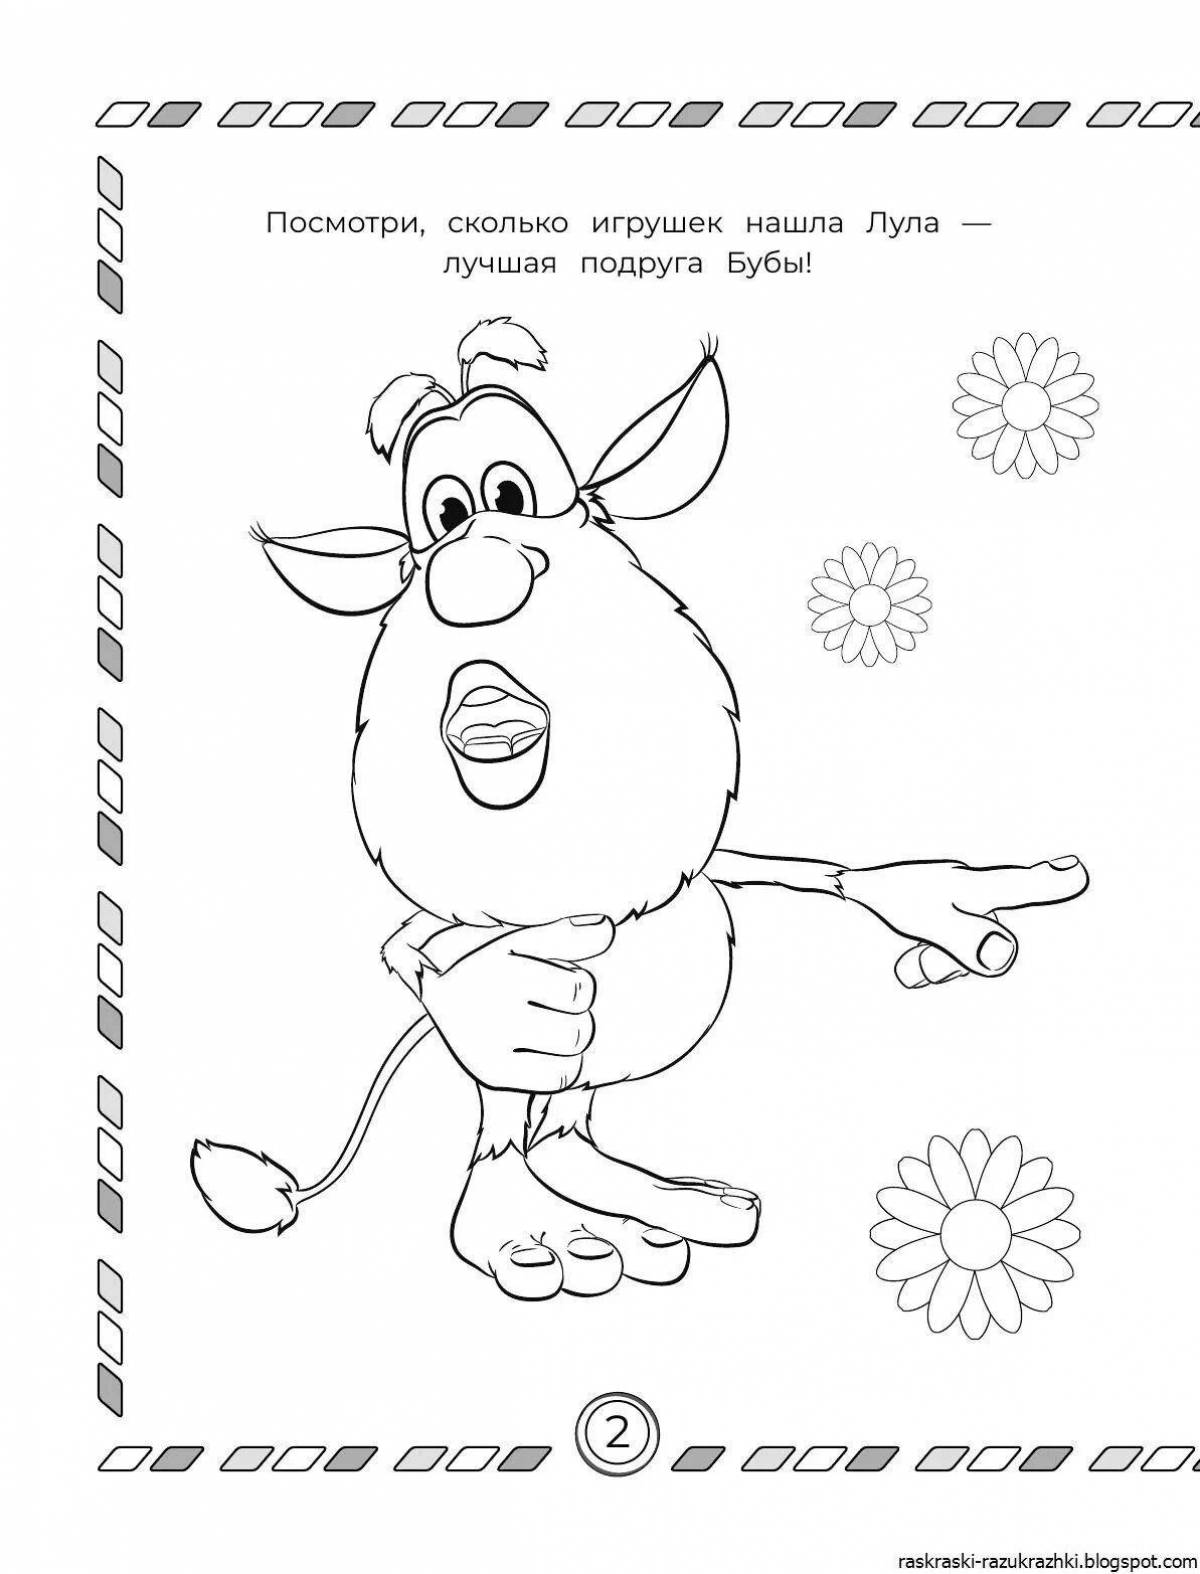 Funny buba coloring book for kids